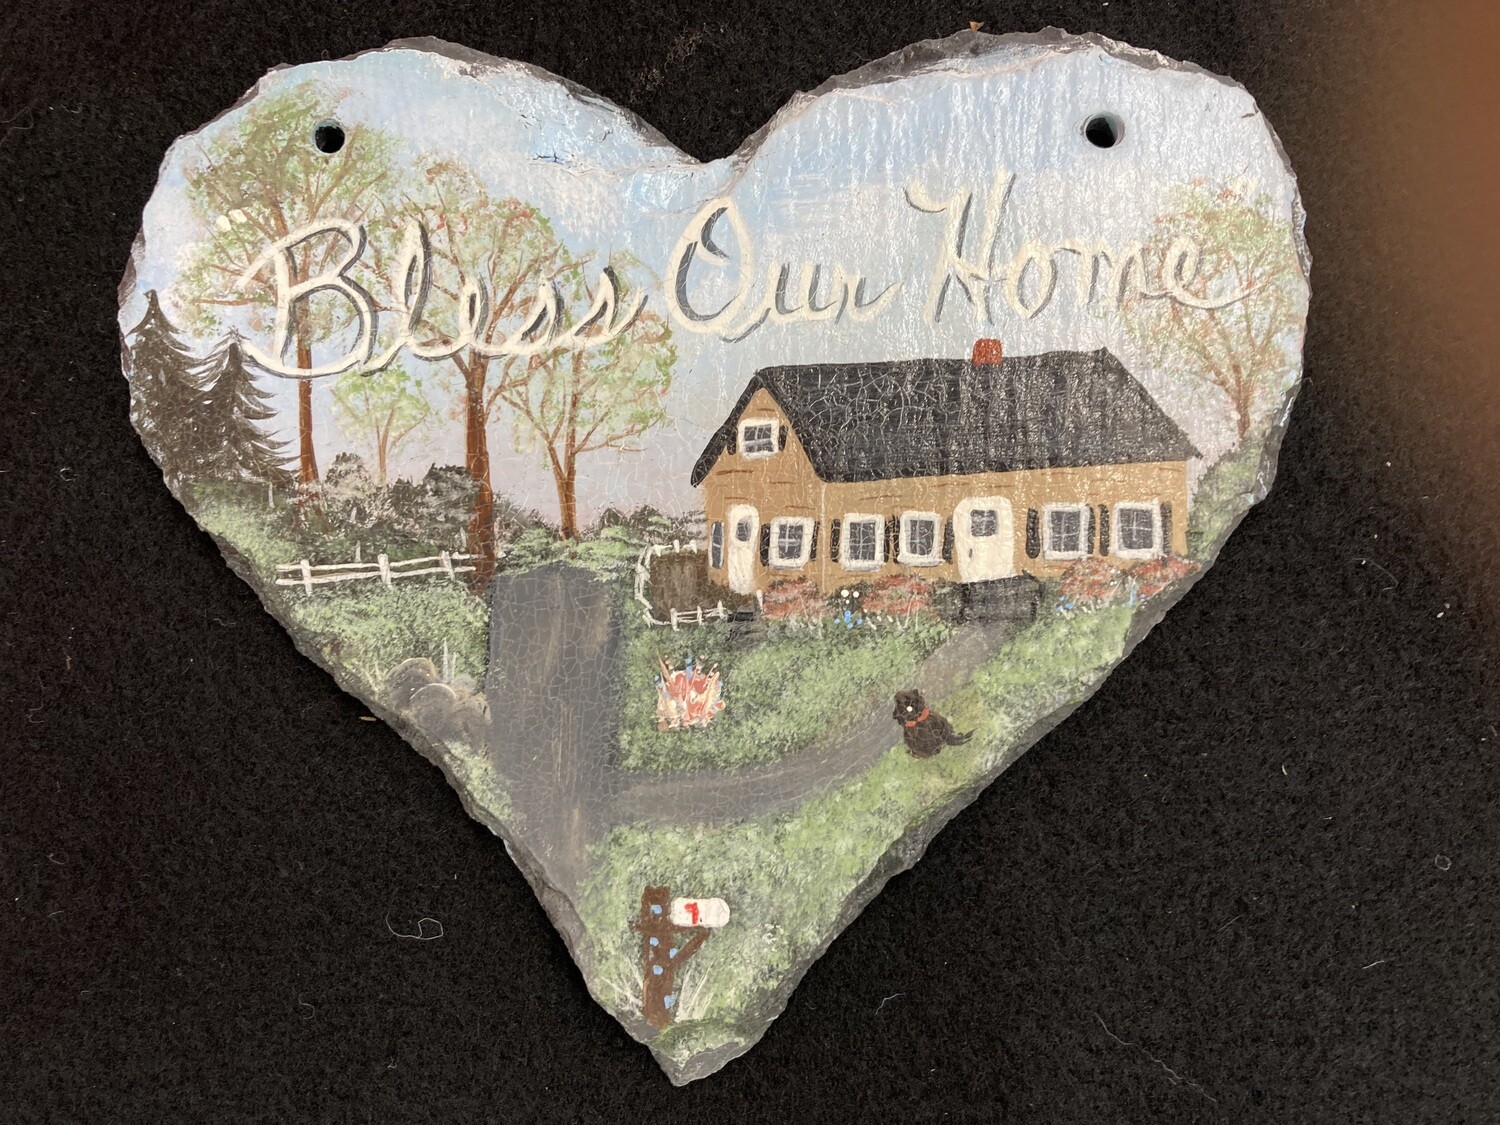 Painted Slate "Bless Our Home" #2314